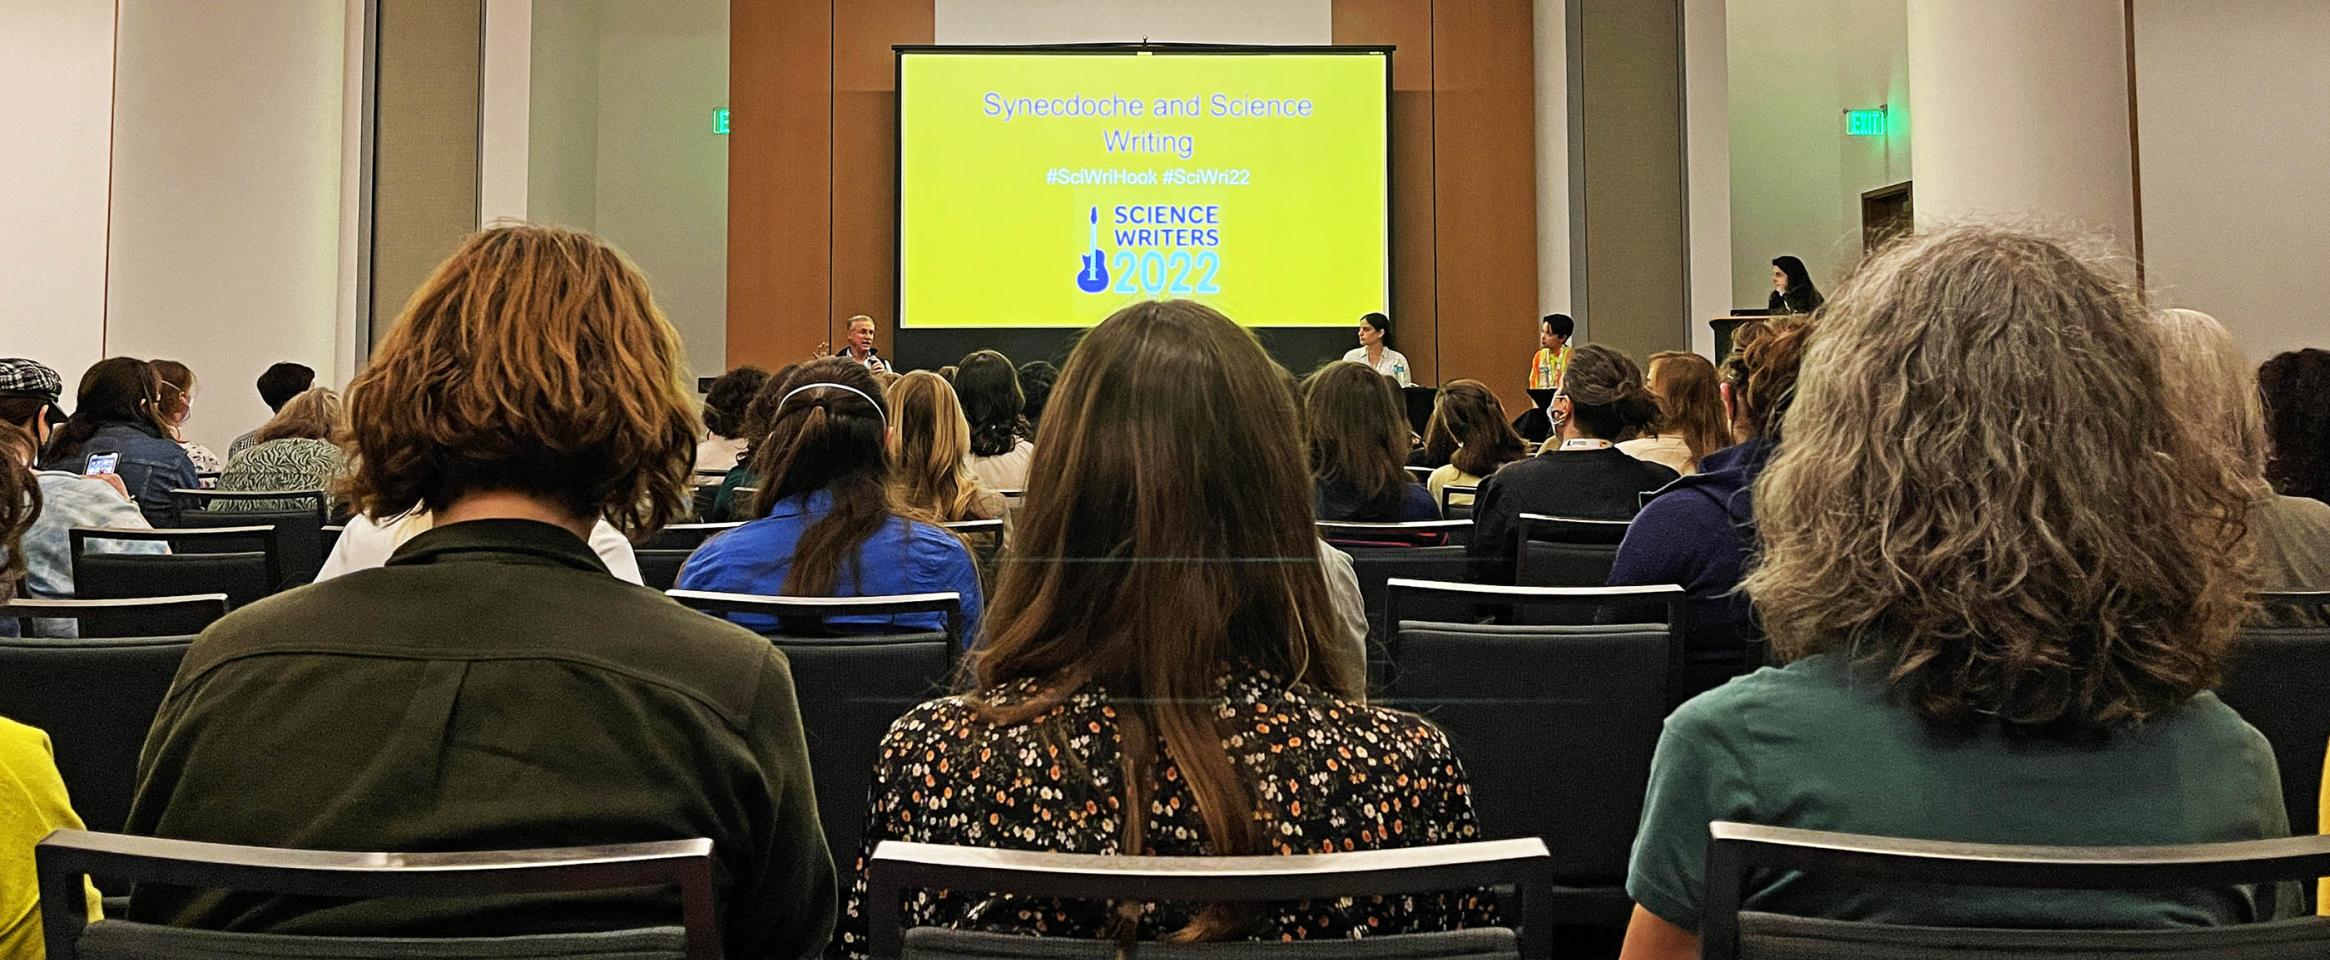 Photo focused on the back of the heads of three audience members amid a sea of attendees in the foreground, while in the background sit panelists David Quarmmen, Sabrina Imbler and Mara Grunbaum below a projector screen with slide title Synecdoche and Science Writing, with moderator Maya L. Kapoor standing at the podium to stage left.